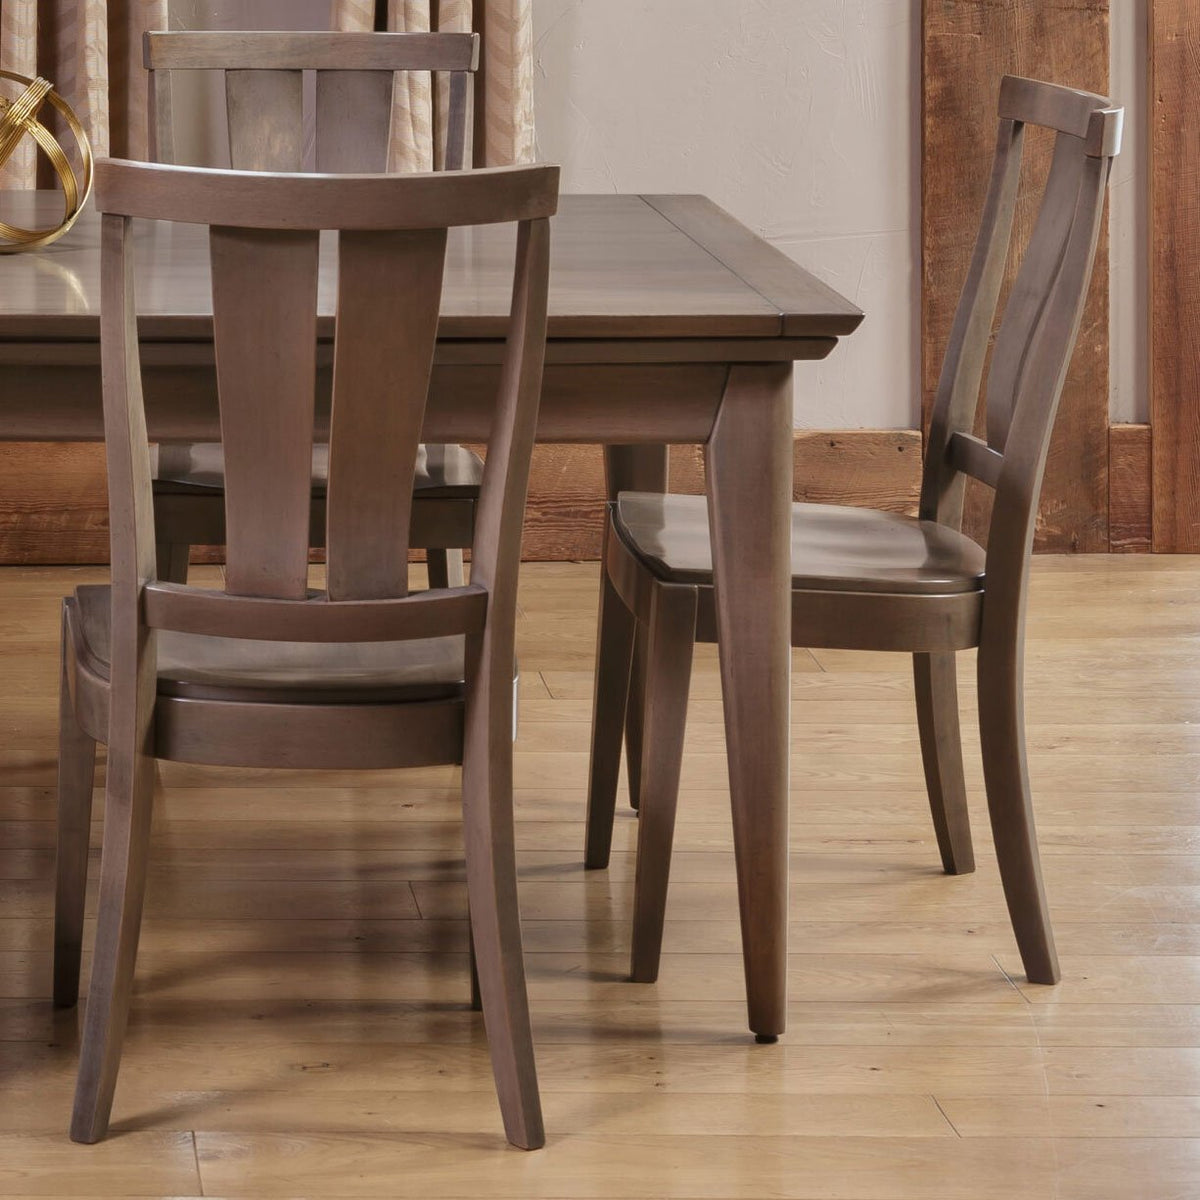 Amish Trigon Dining Chair - snyders.furniture